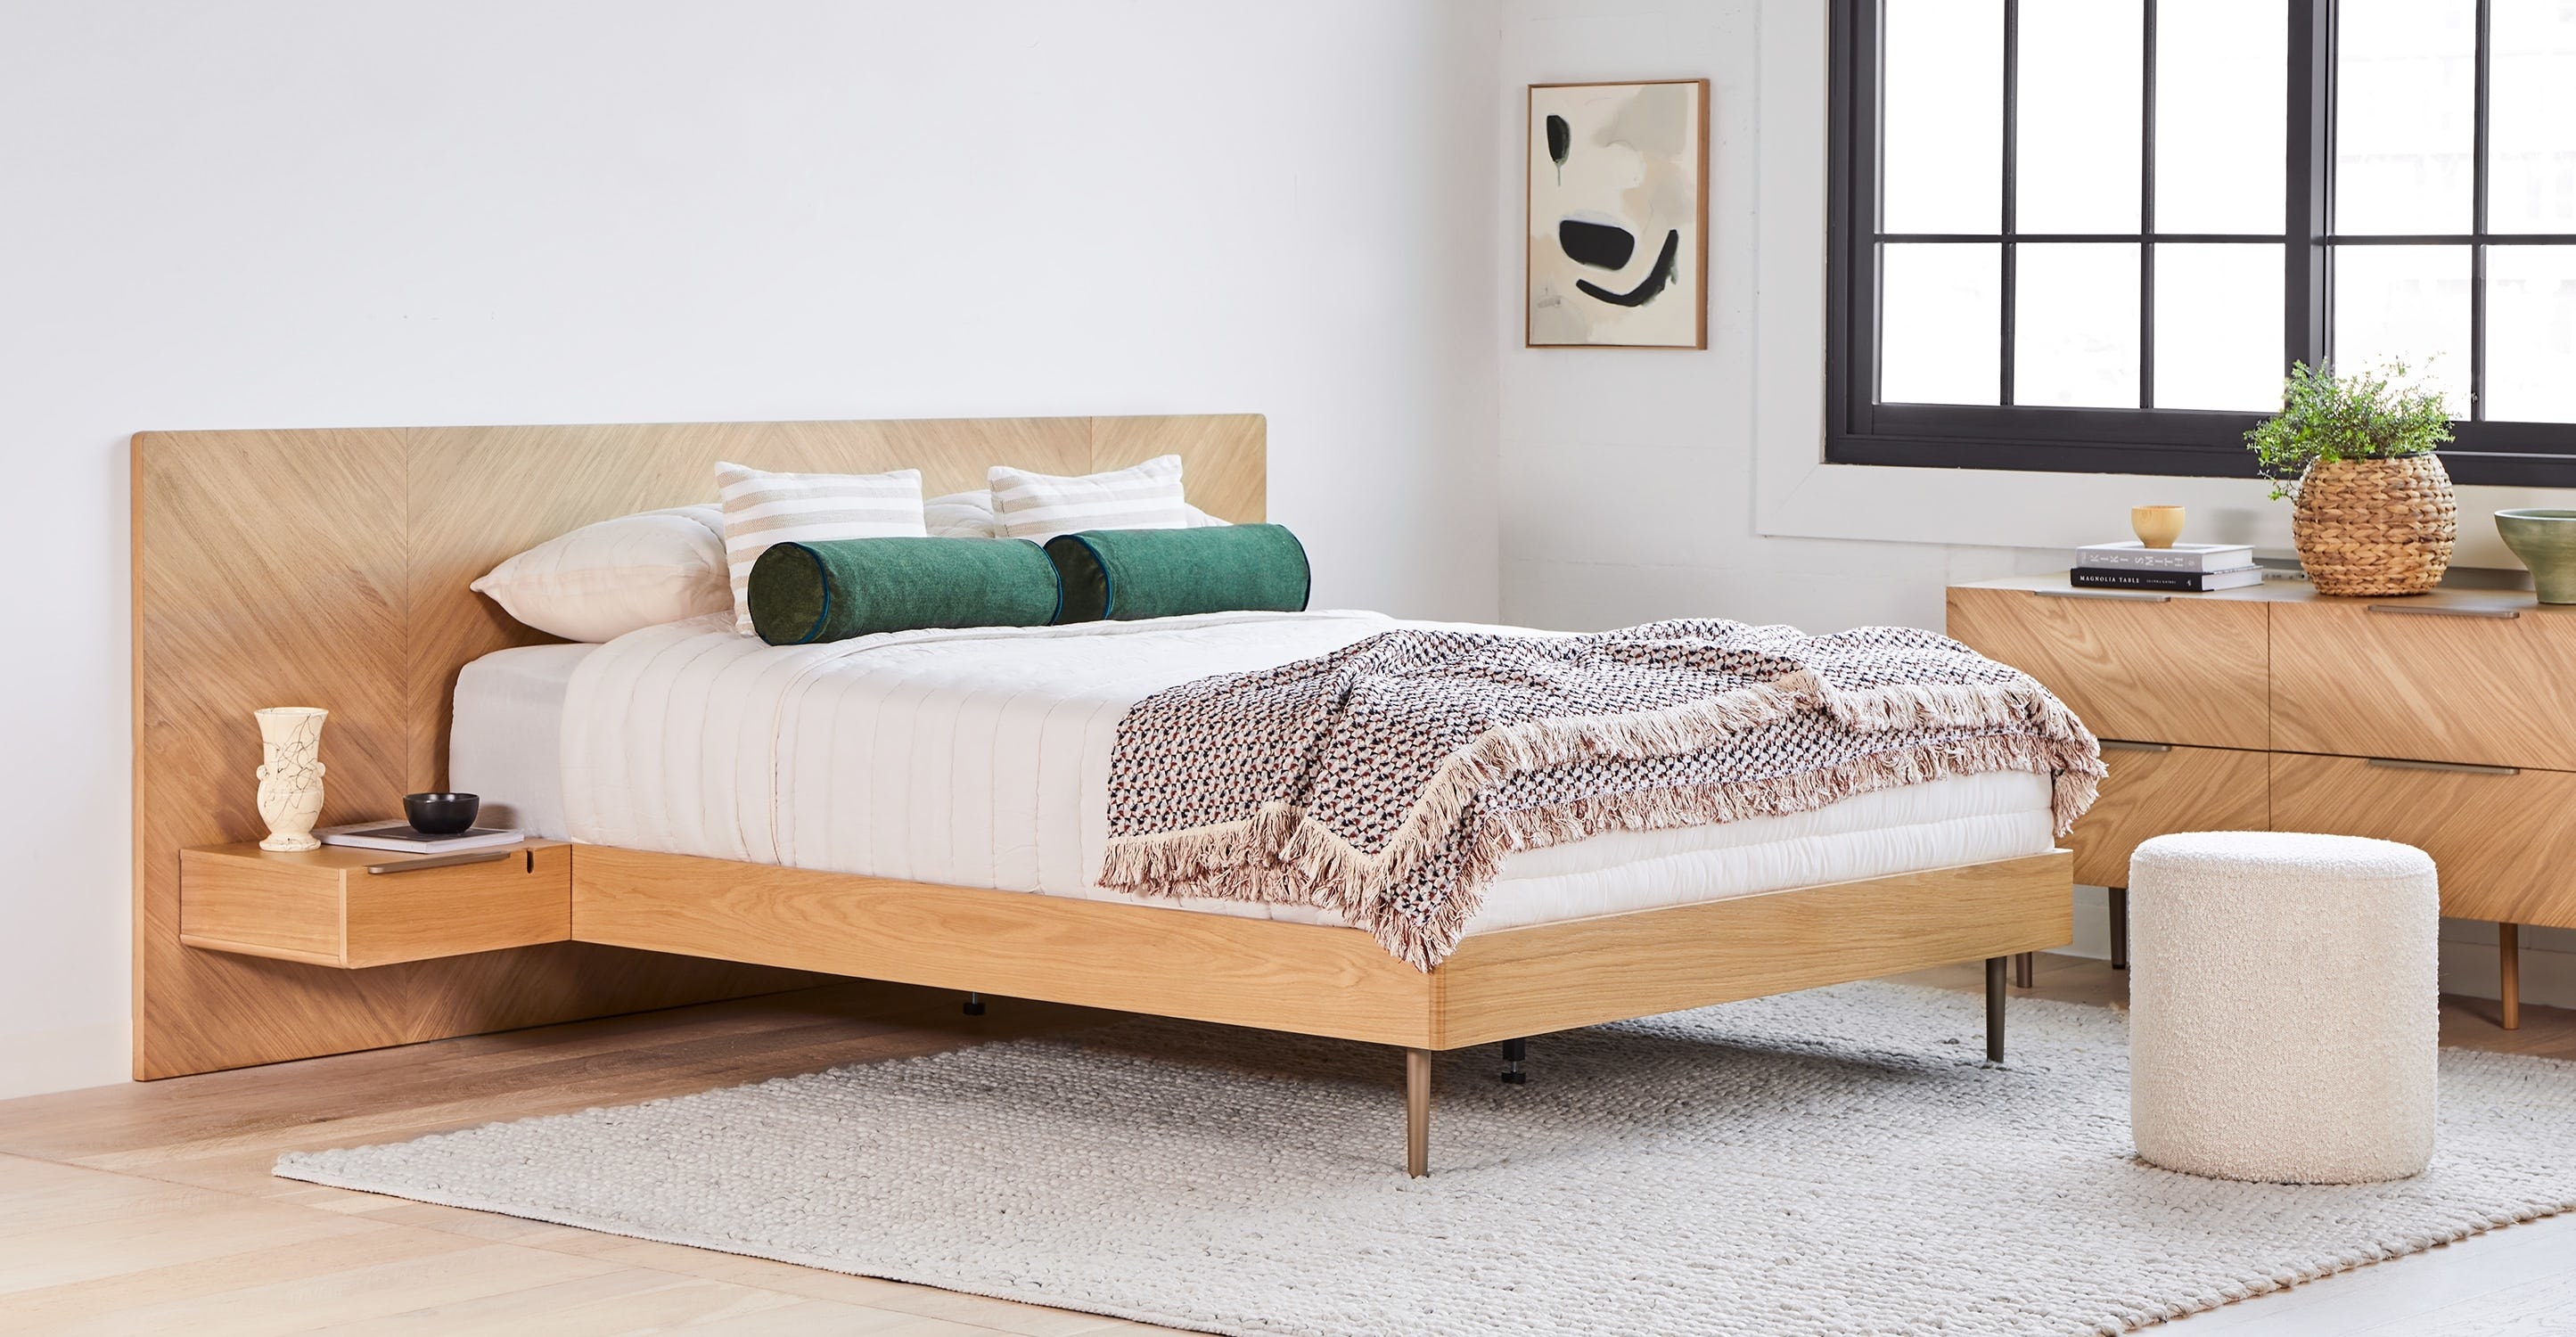 the oak bed frame with built-in floating end tables